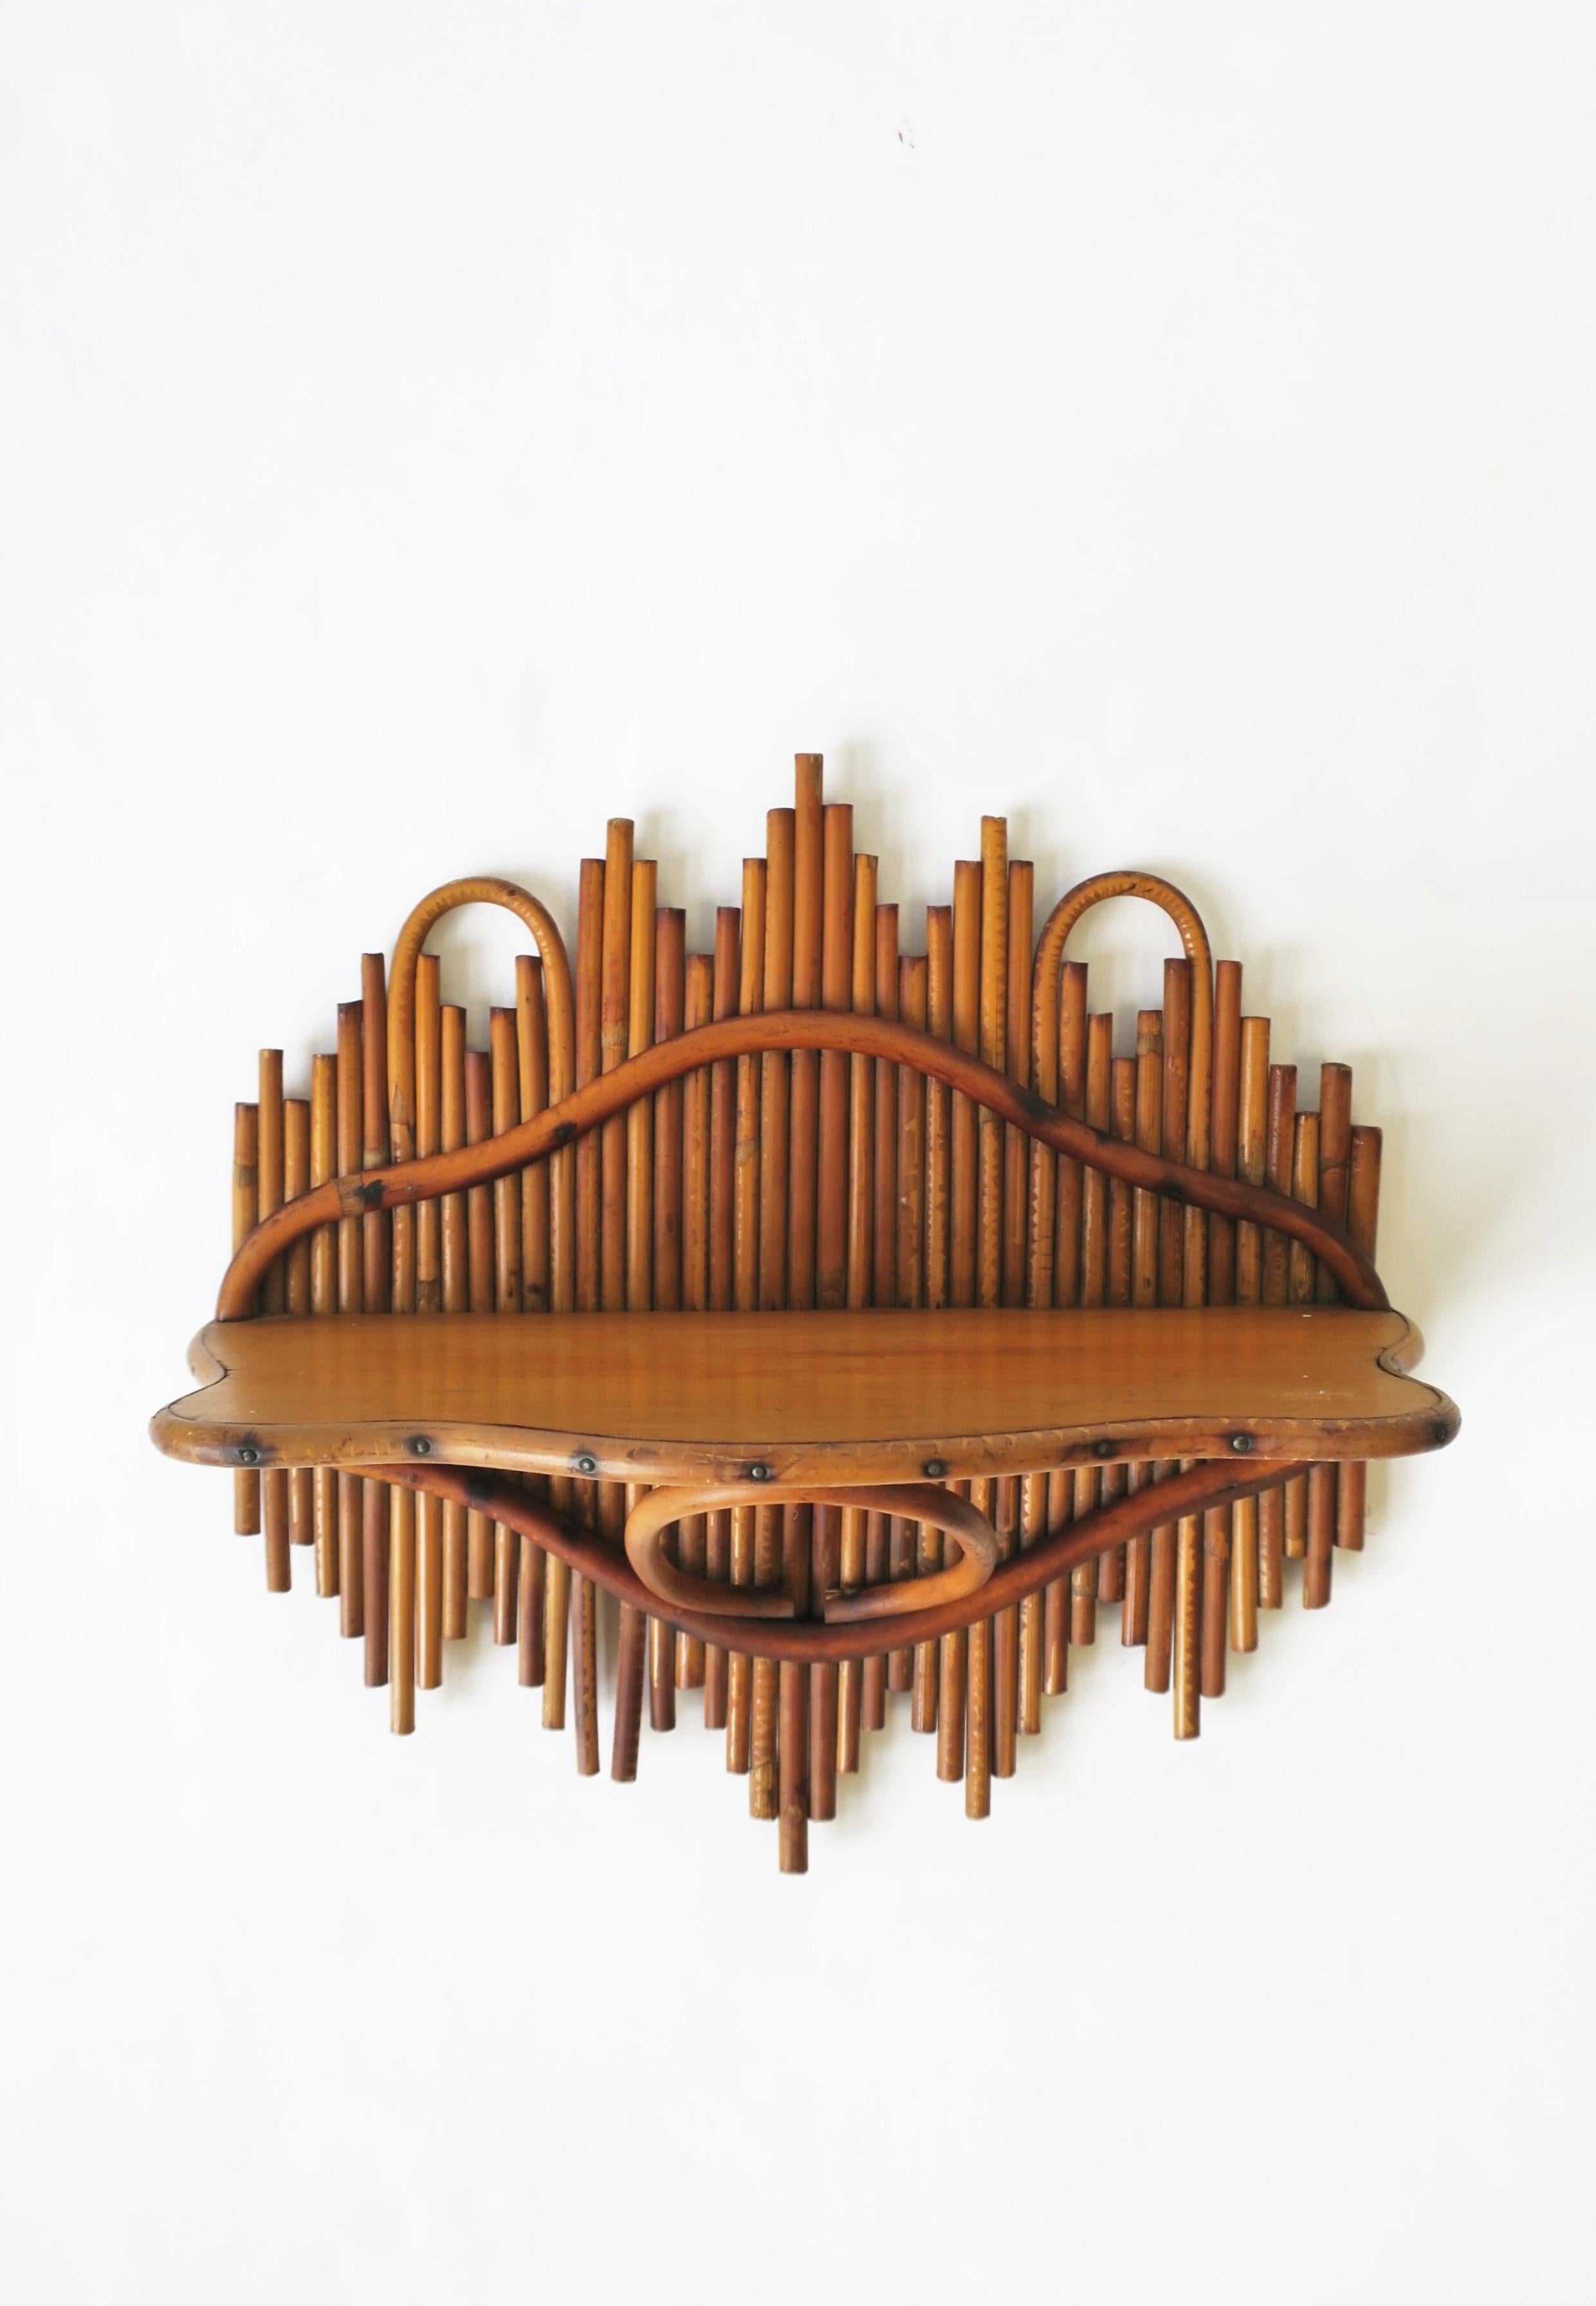 A beautiful honey brown colored pencil reed wood and bentwood wall shelf, circa early-20th century. 

Dimensions: 5.75